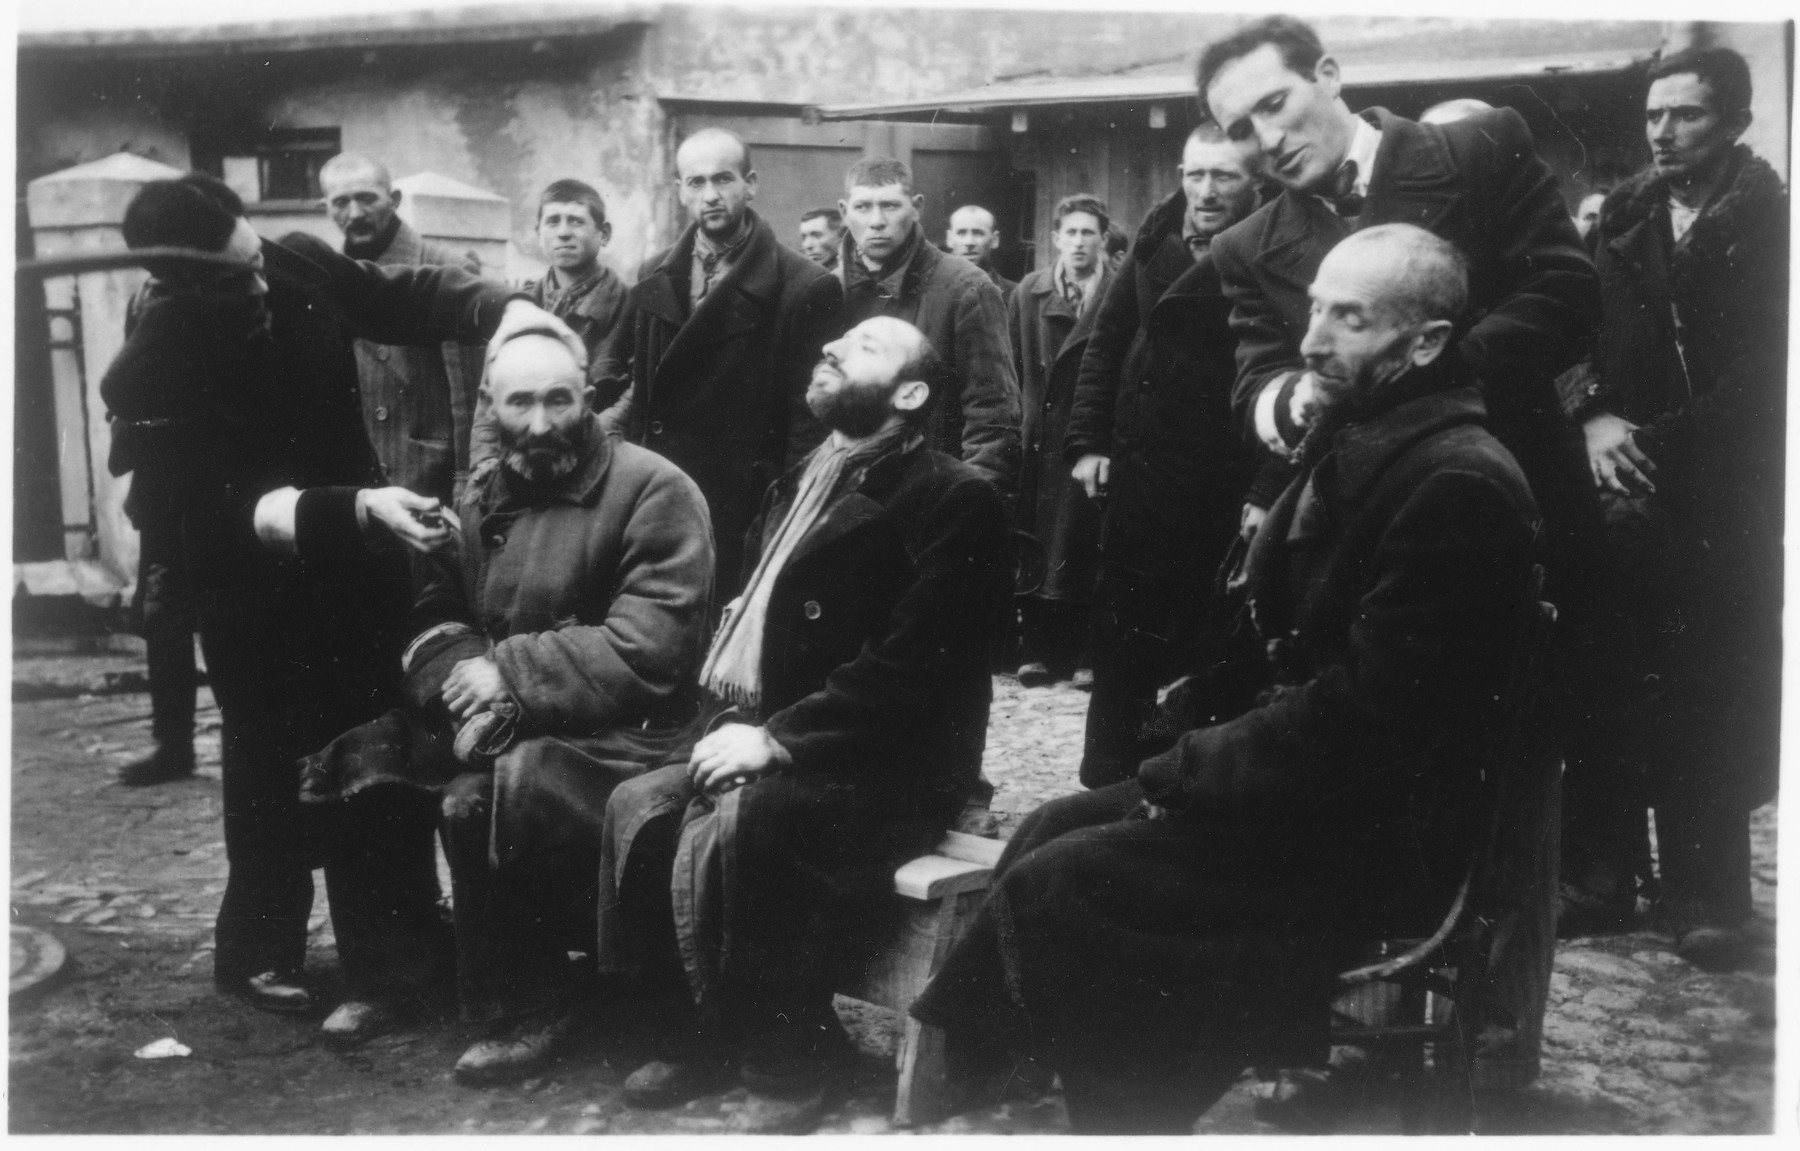 Jewish men are forced to shave the beards of other religious Jews while SS men watch in amusement.

The caption of the SS-Archiv says "Reinrassige Juden bei Schoenheitspflege in Palinin (?) Okt. 1941" (Purebred Jews during beauty care in Palinin (?) Oct. 1941).